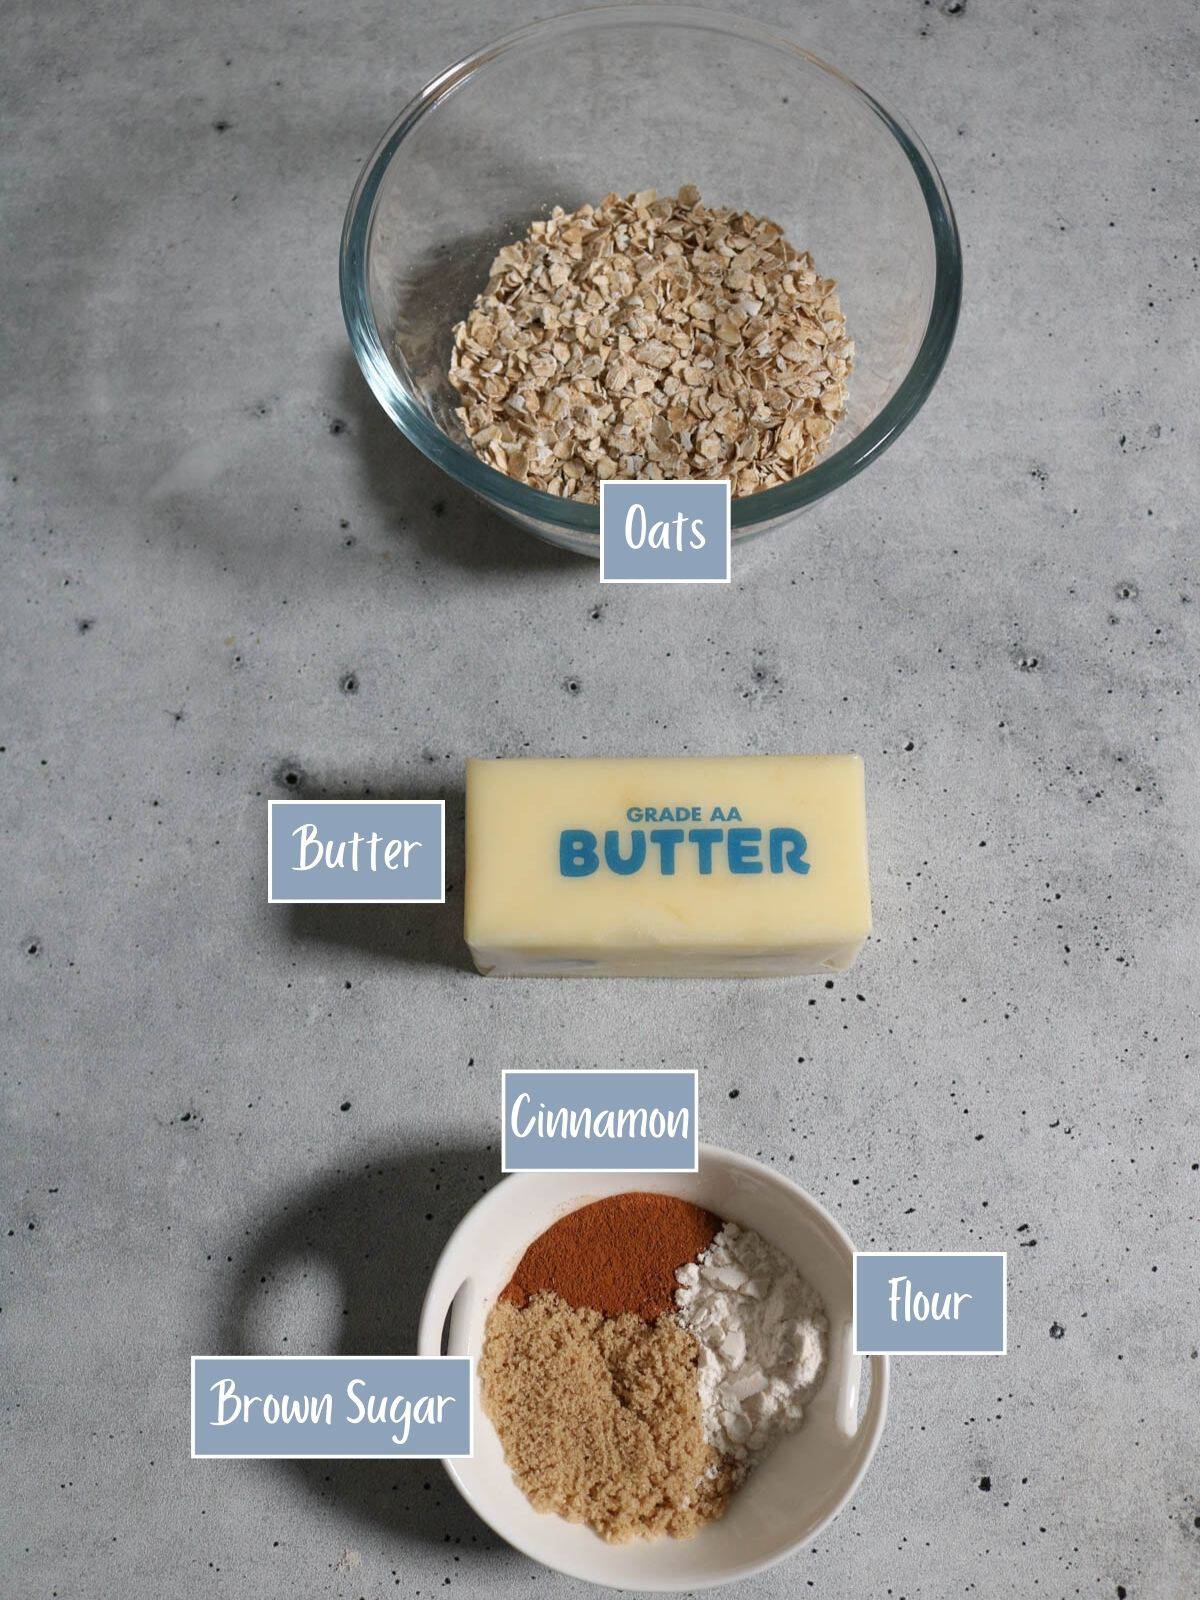 Labeled ingredients for the oat crumble topping.